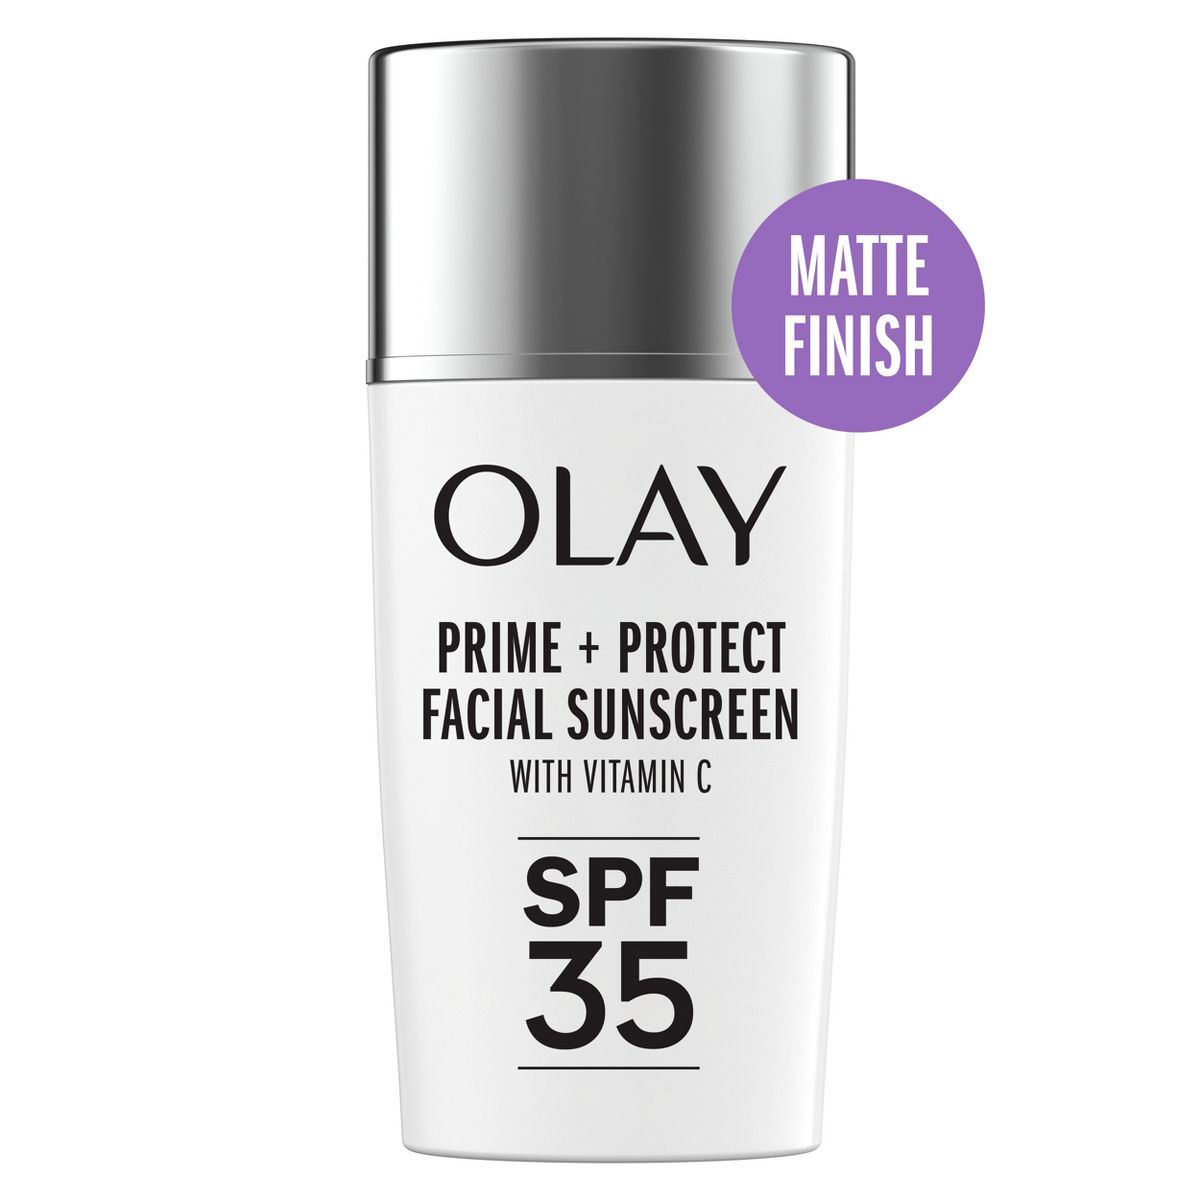 Olay Prime & Protect Mattifying Face Lotion - SPF35 - 1.3 fl oz | Target